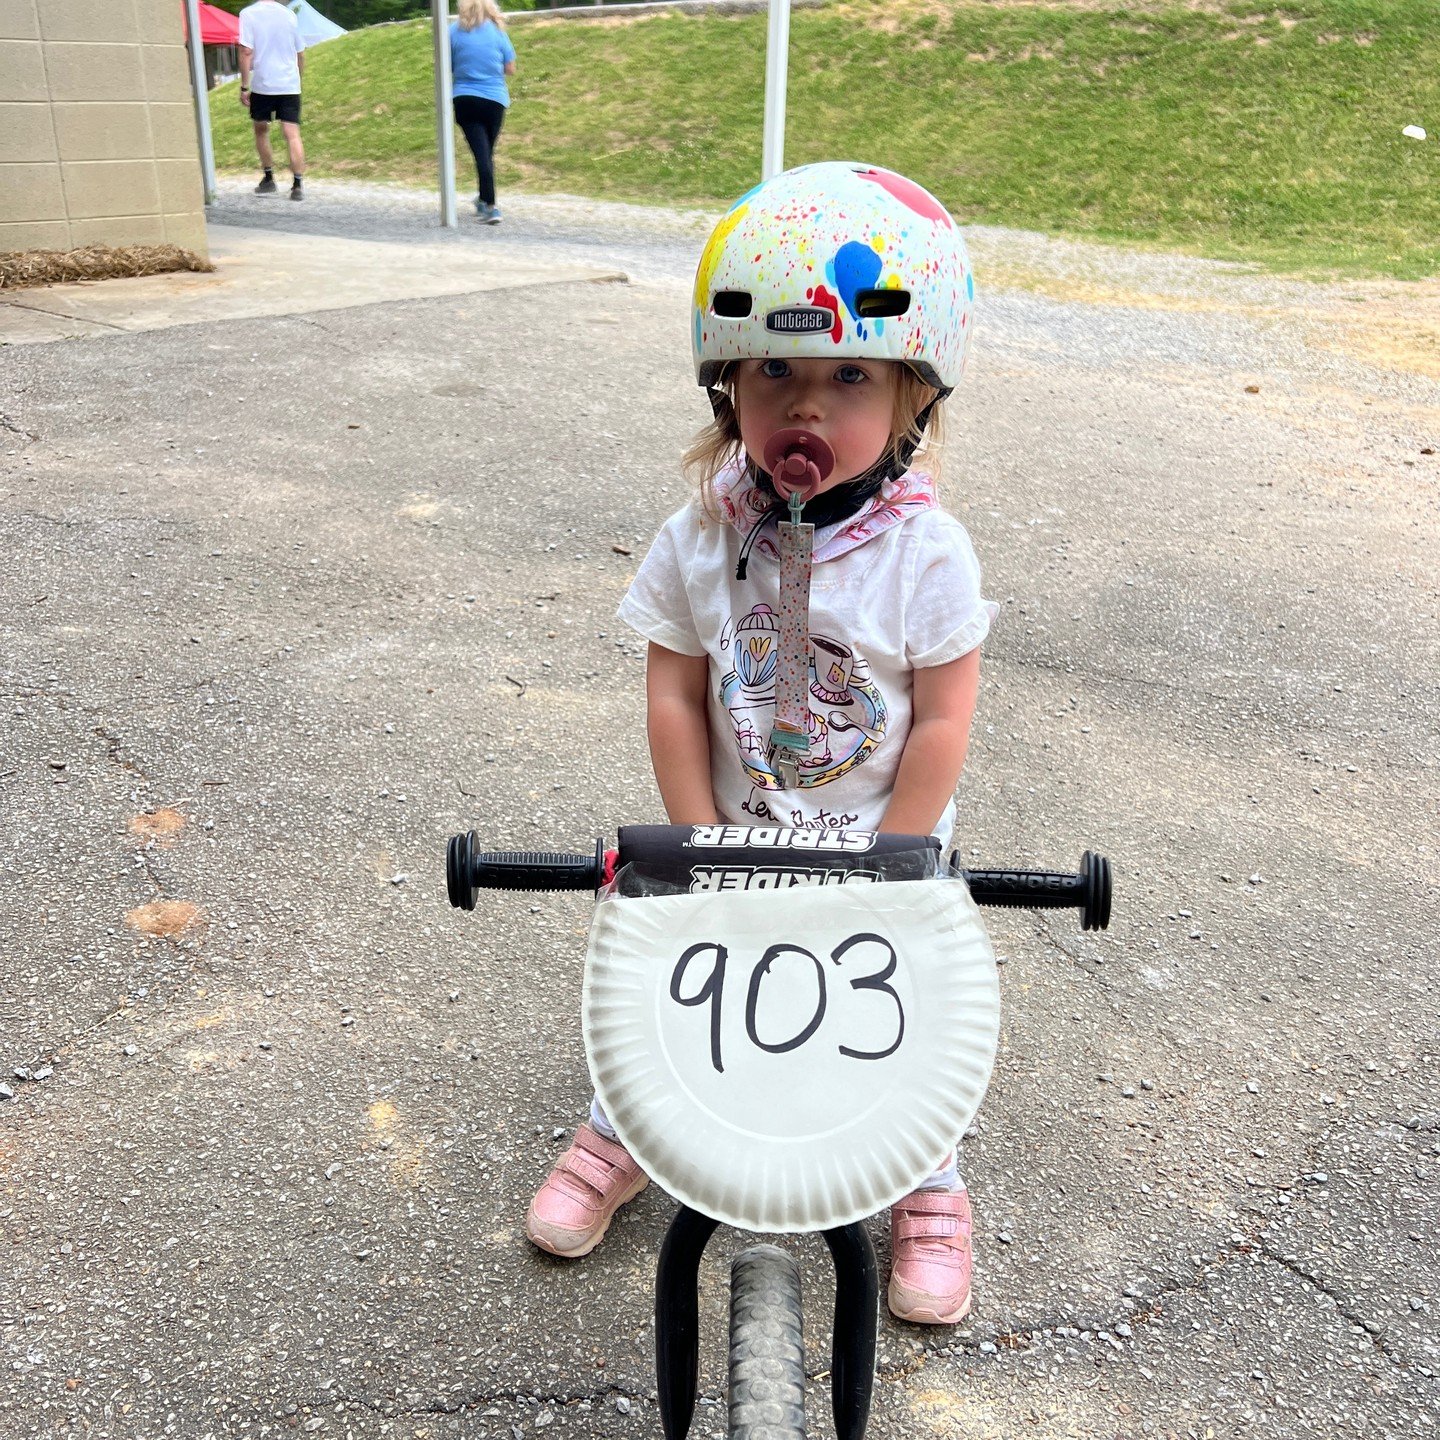 LouElla is now racing BMX at the ripe age of 2. This Saturday at her BMX race she was going against all 4-5 year olds and during the 2nd round as she was quite far behind her competition, she began repeating over and over, &quot;I lost!&quot; Then sh